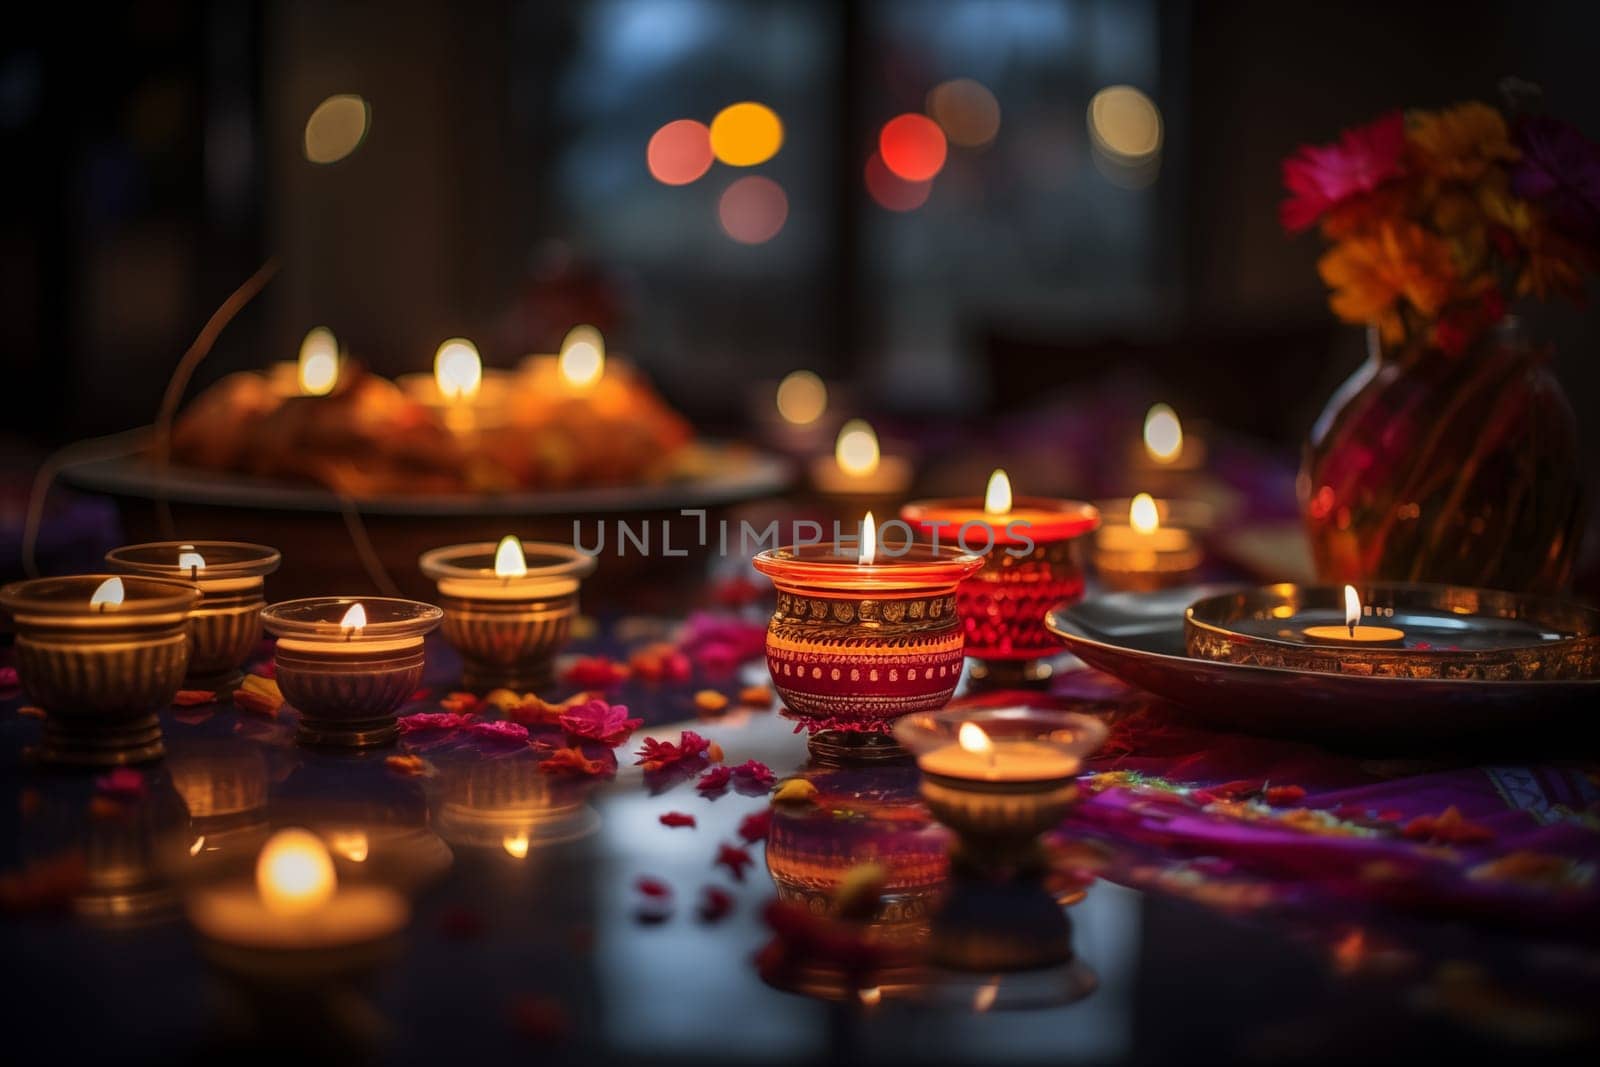 Diwali indian festival of lights background - burning diya lamps on a decorated table close up